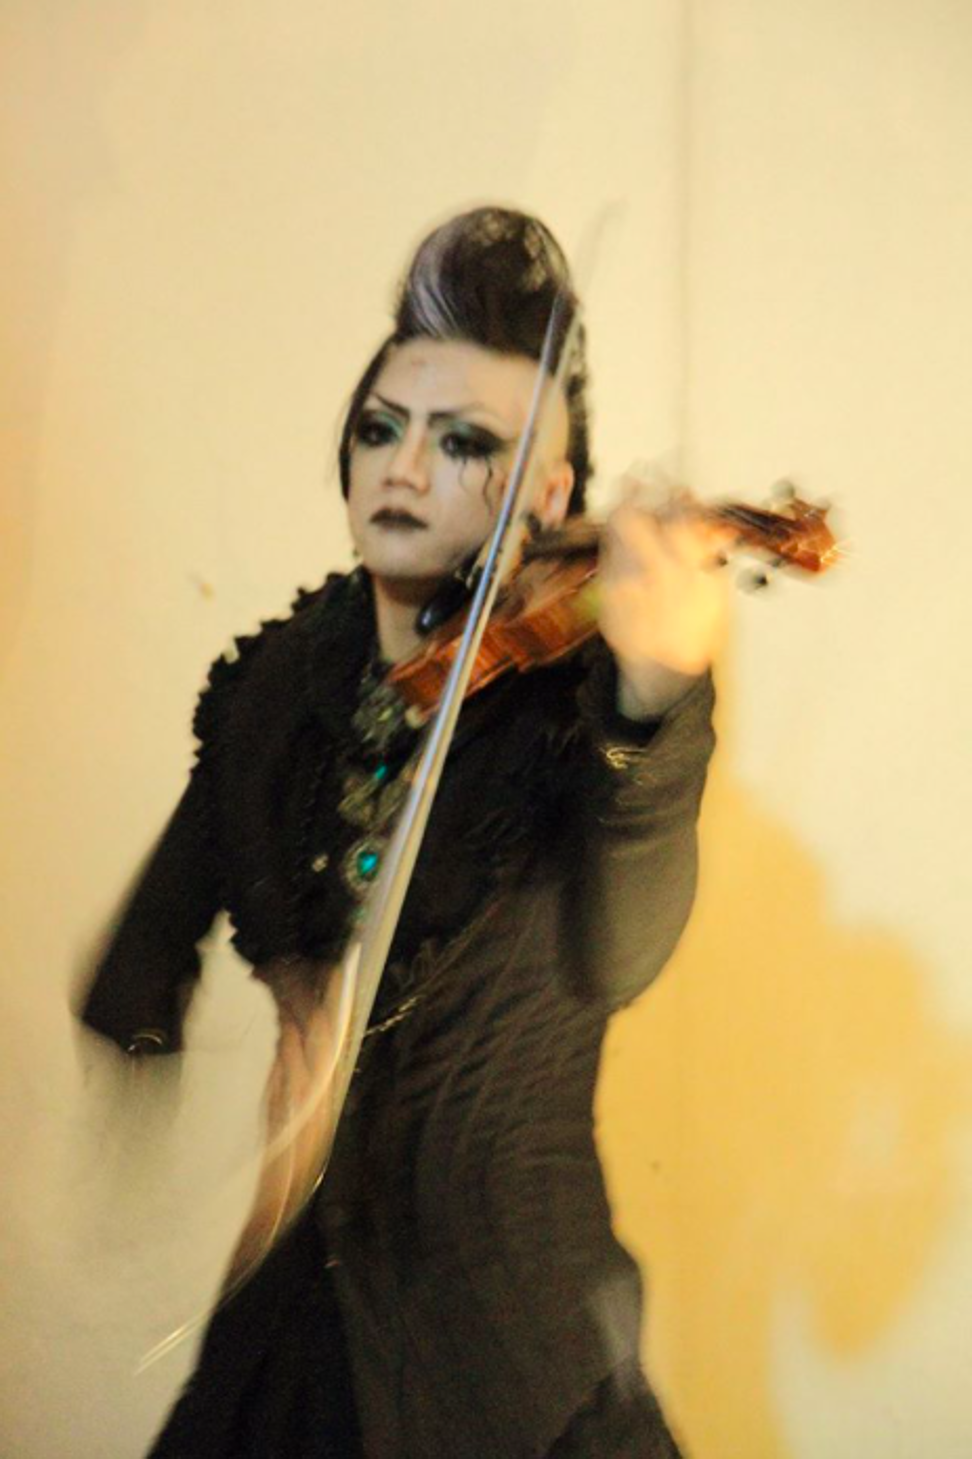 Gothic violinist Fleurs du Mal will also perform at the festival.